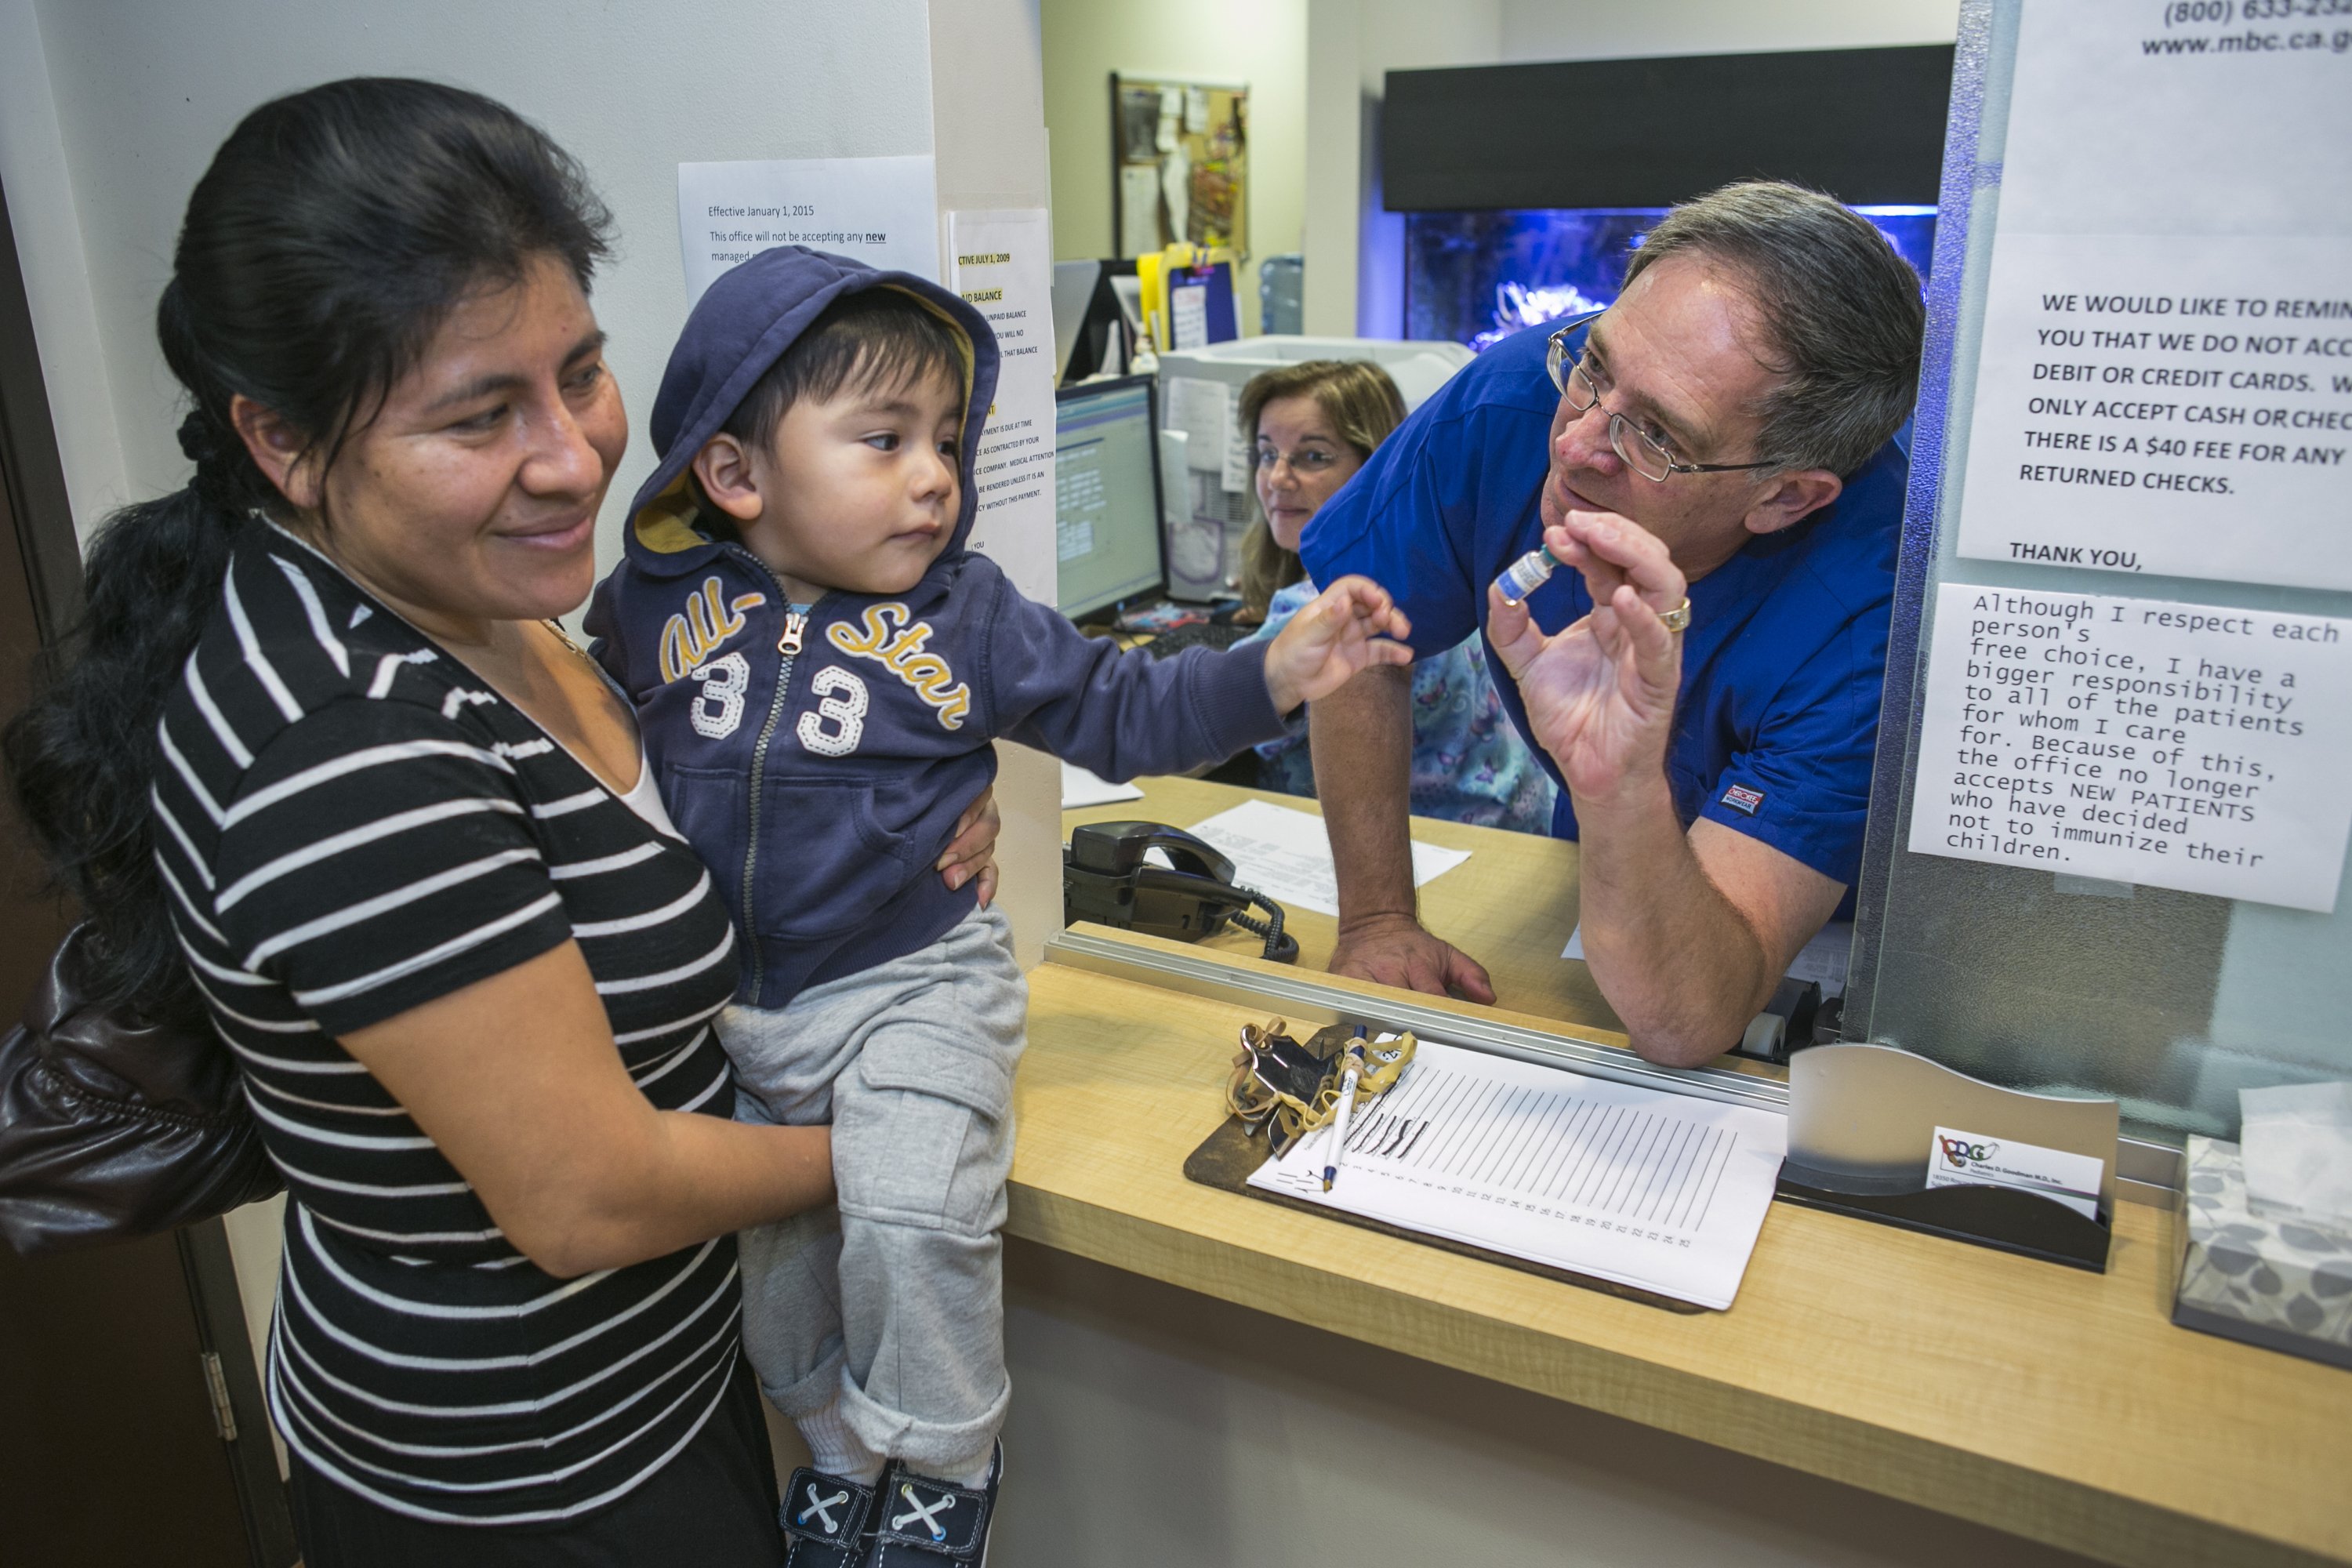 Pediatrician Dr. Charles Goodman talks with Carmen Lopez, who is holding her 18-month-old son Daniel after being vaccinated with the measles-mumps-rubella (MMR) vaccine, at his practice in Northridge, Calif., on Jan. 29, 2015 (Damian Dovarganes—AP)